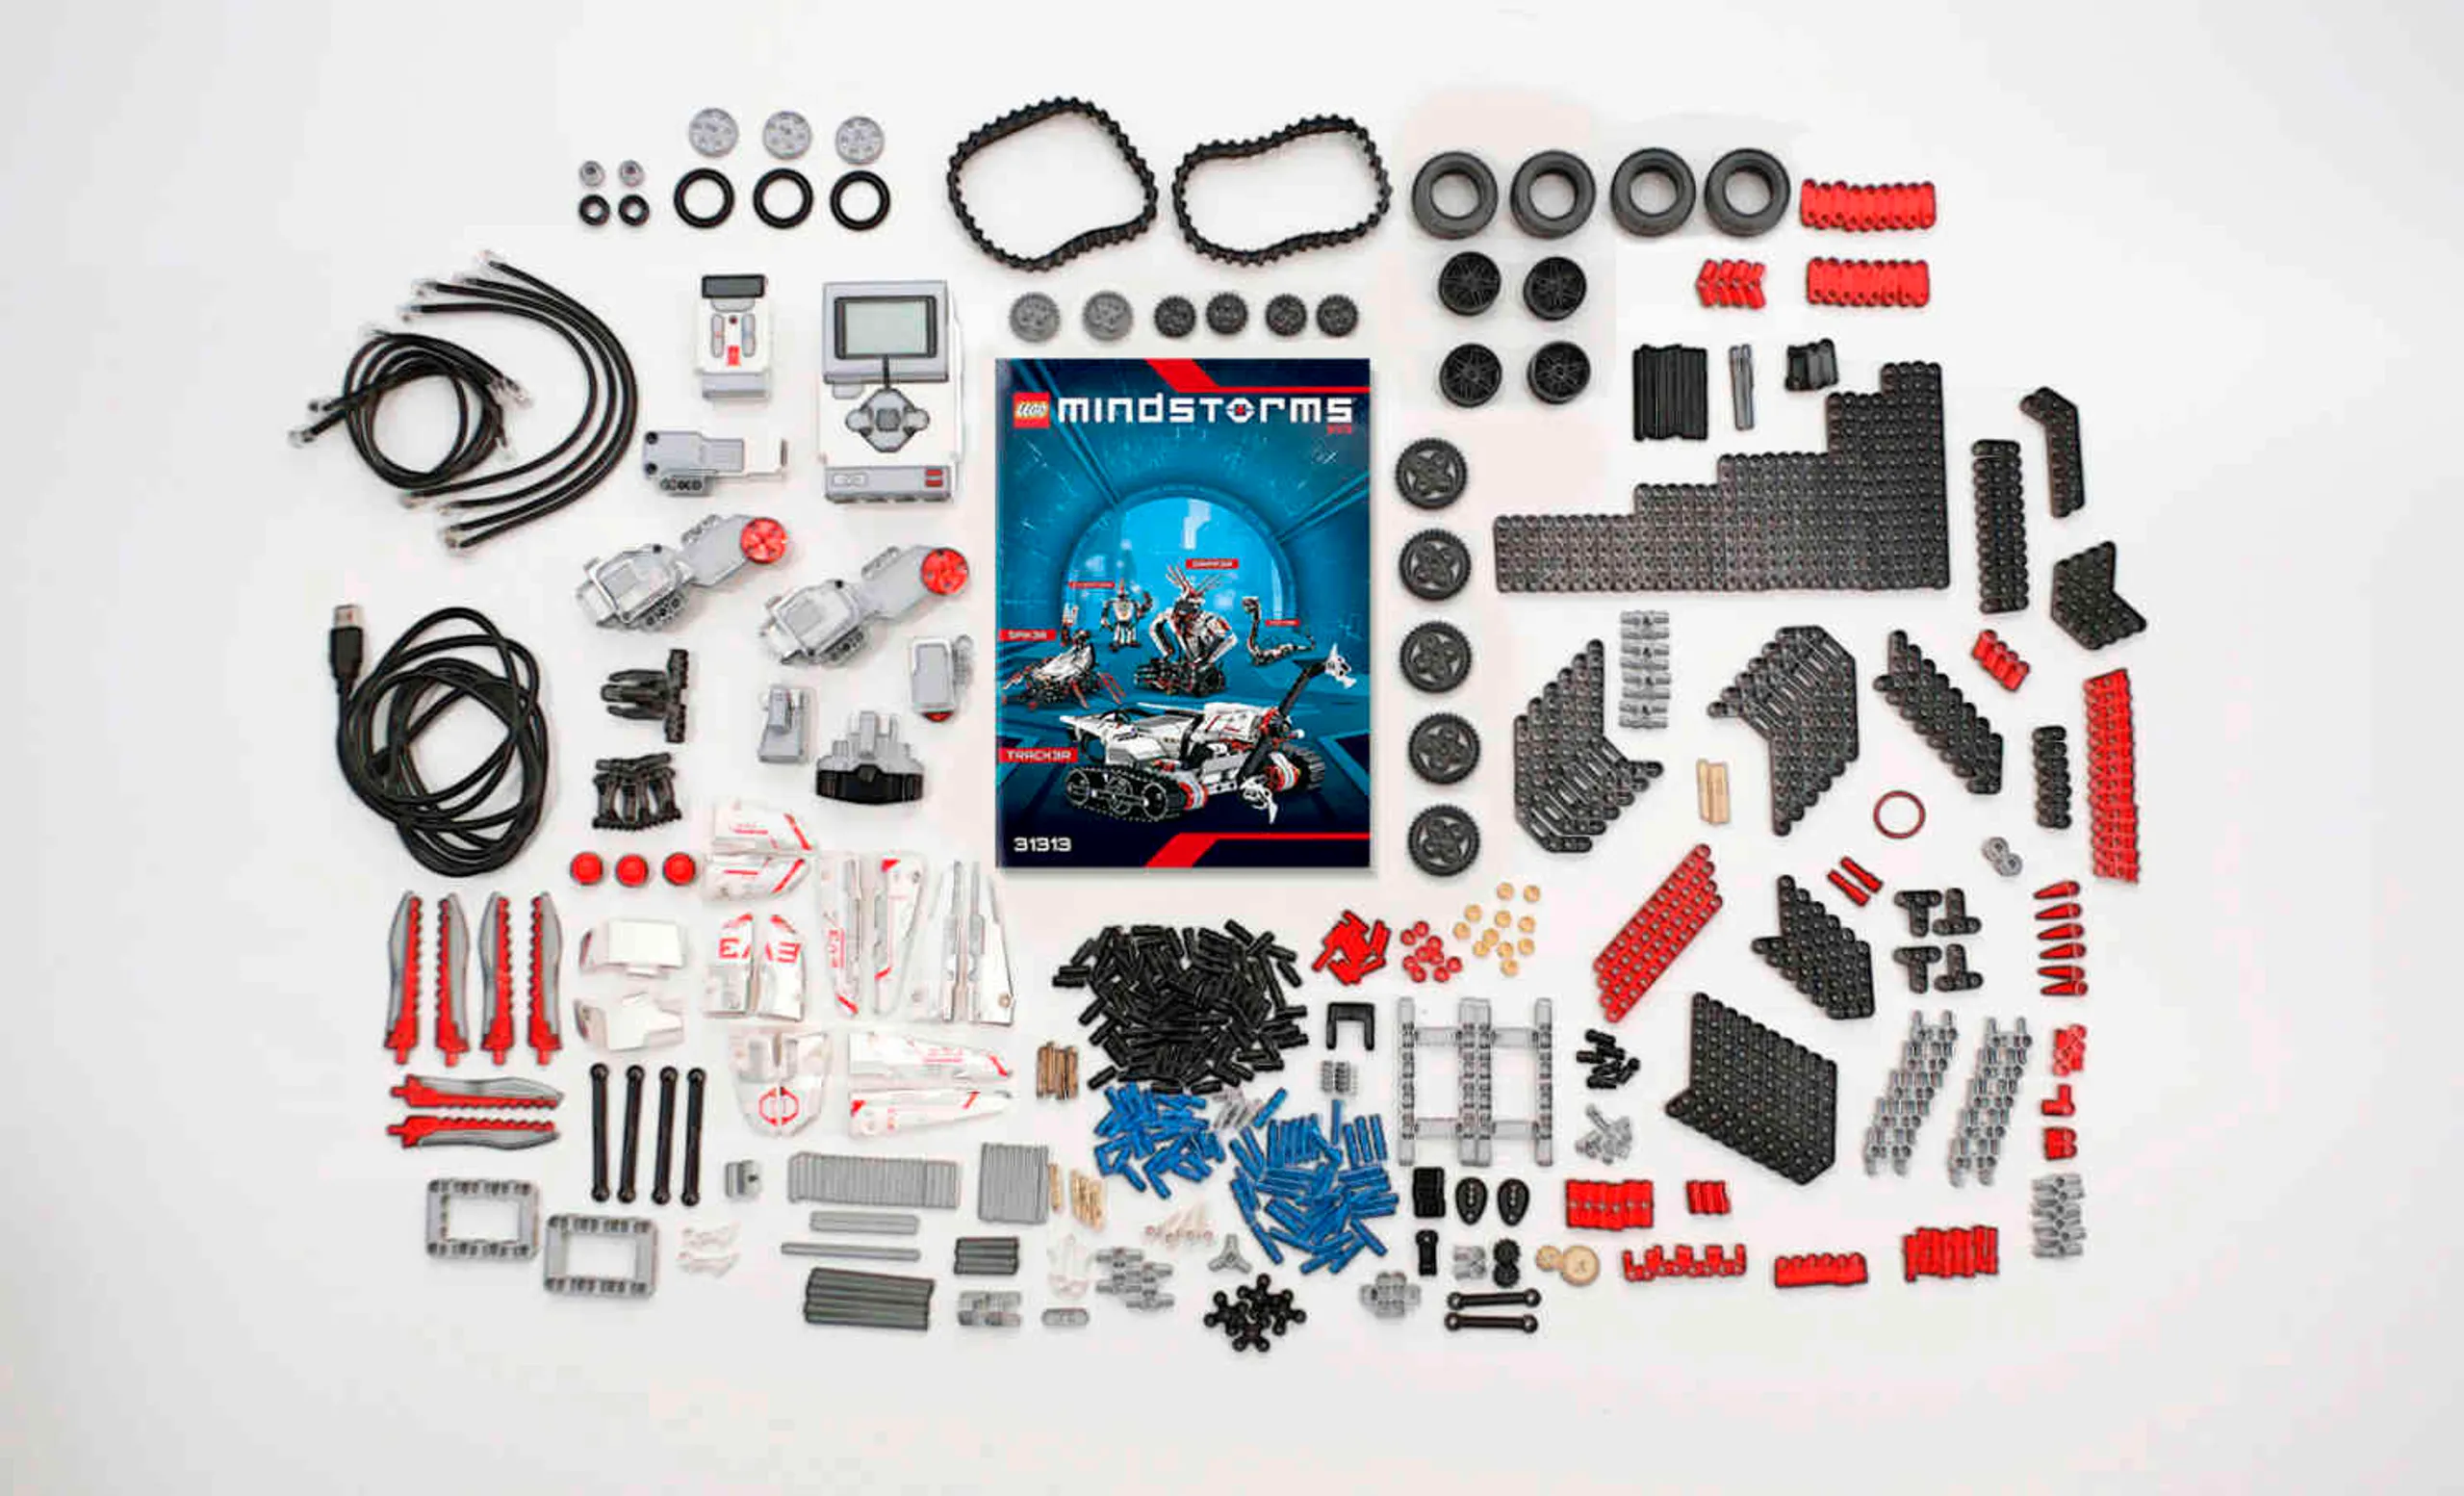 LEGO Mindstorms - 31313 MINDSTORMS EV3 - Use all these normal brick and technic elements to make the LEGO Mindstorms robot.